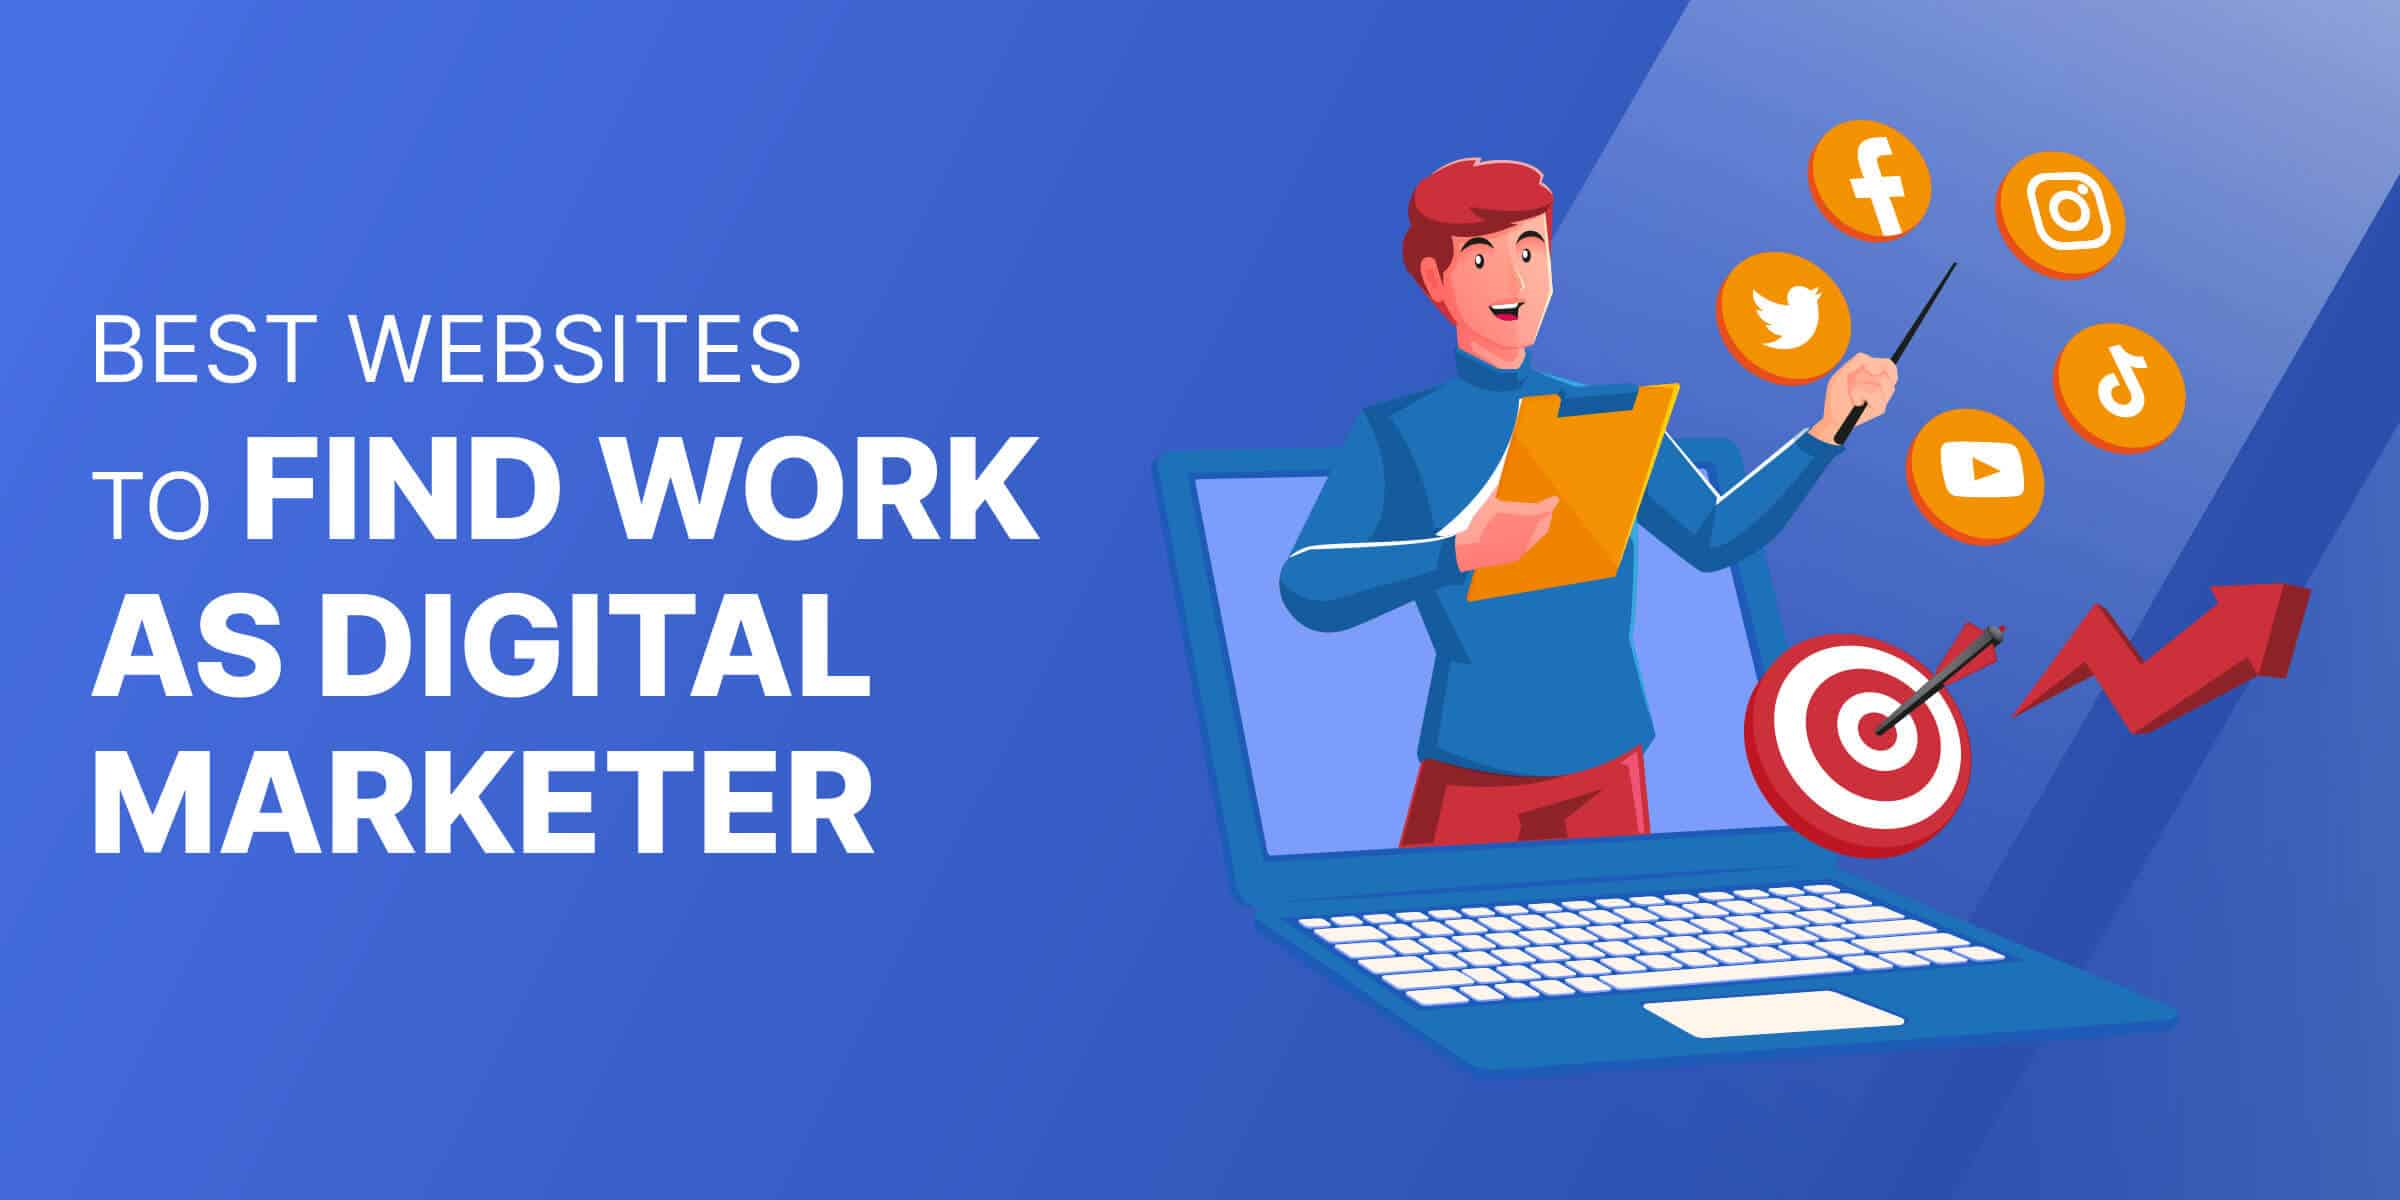 Best places to Find Work as Digital Marketer